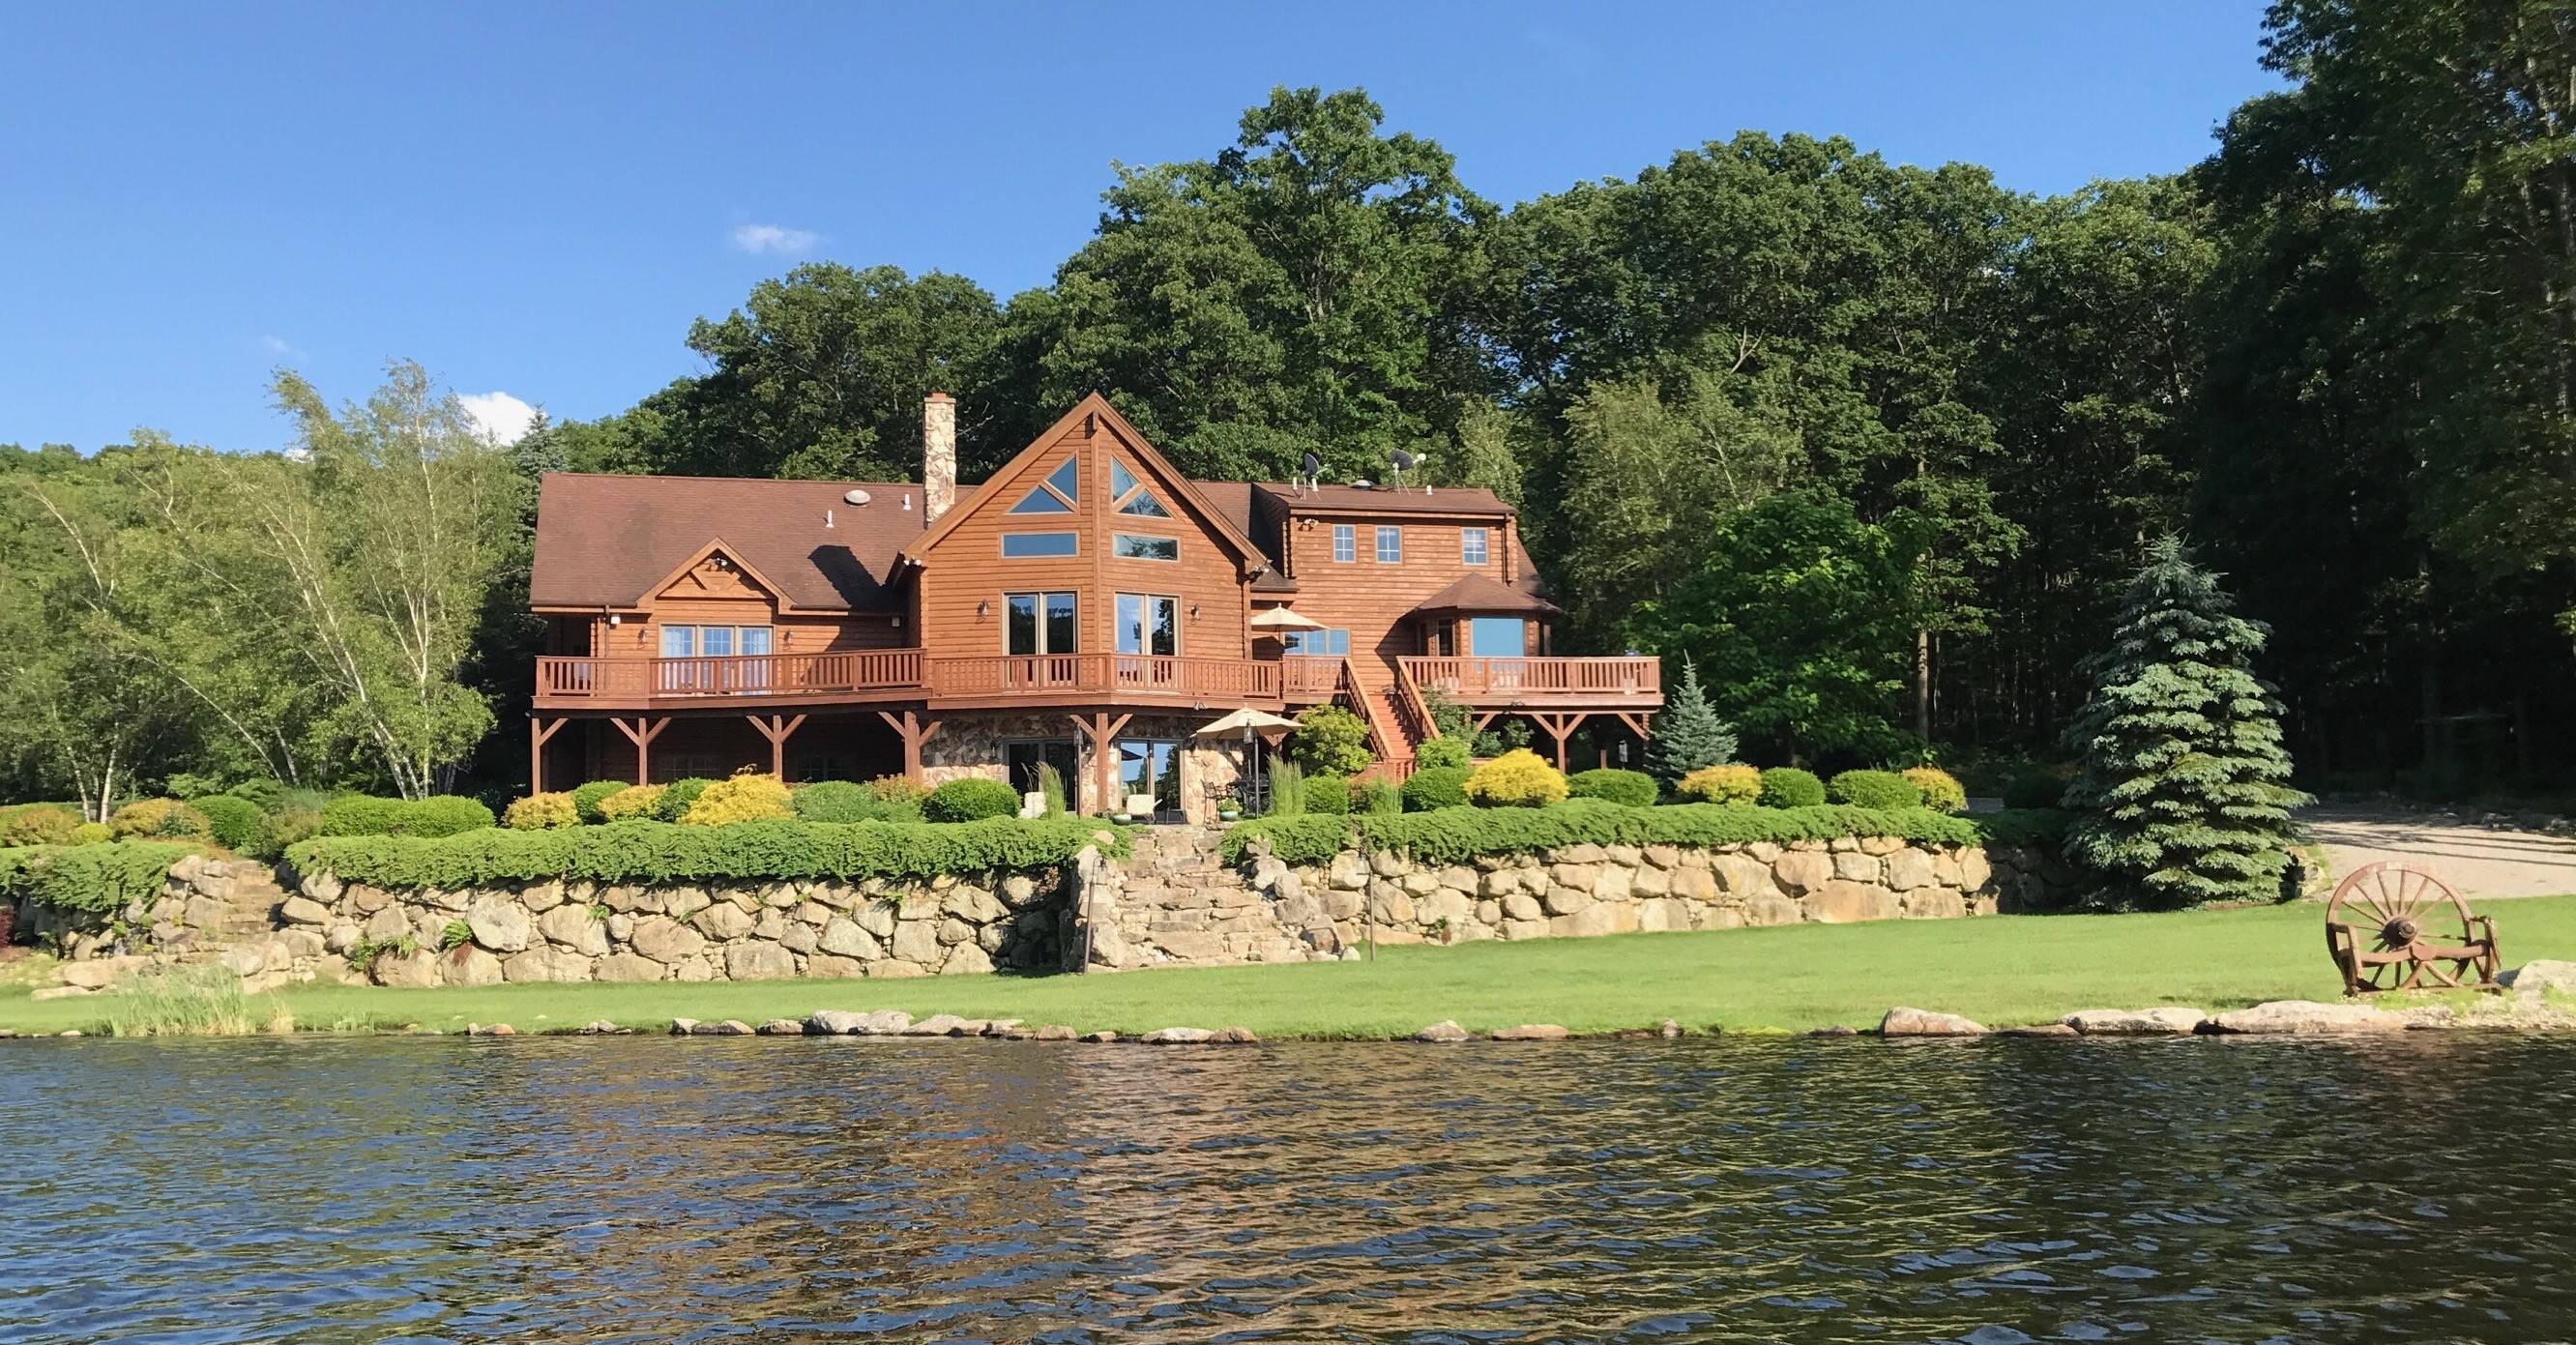 OWN YOUR OWN LAKE!!  CUSTOM BUILT LOG CABIN HOME ON 100 ACRE PROPERTY - MINUTES TO NYC